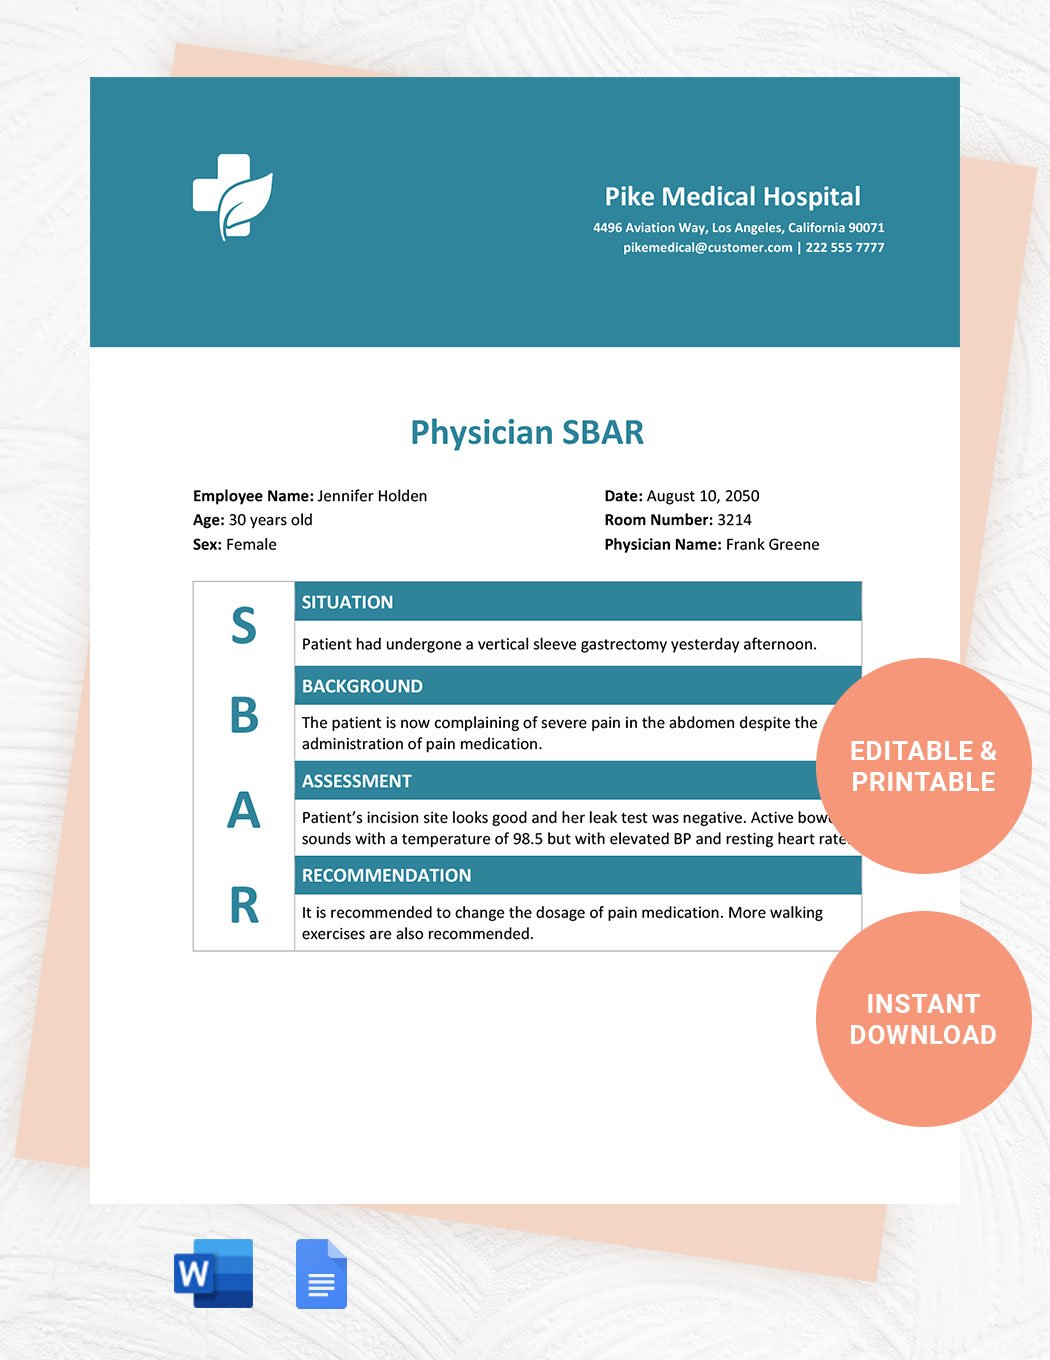 Physician SBAR Template in Word, Google Docs